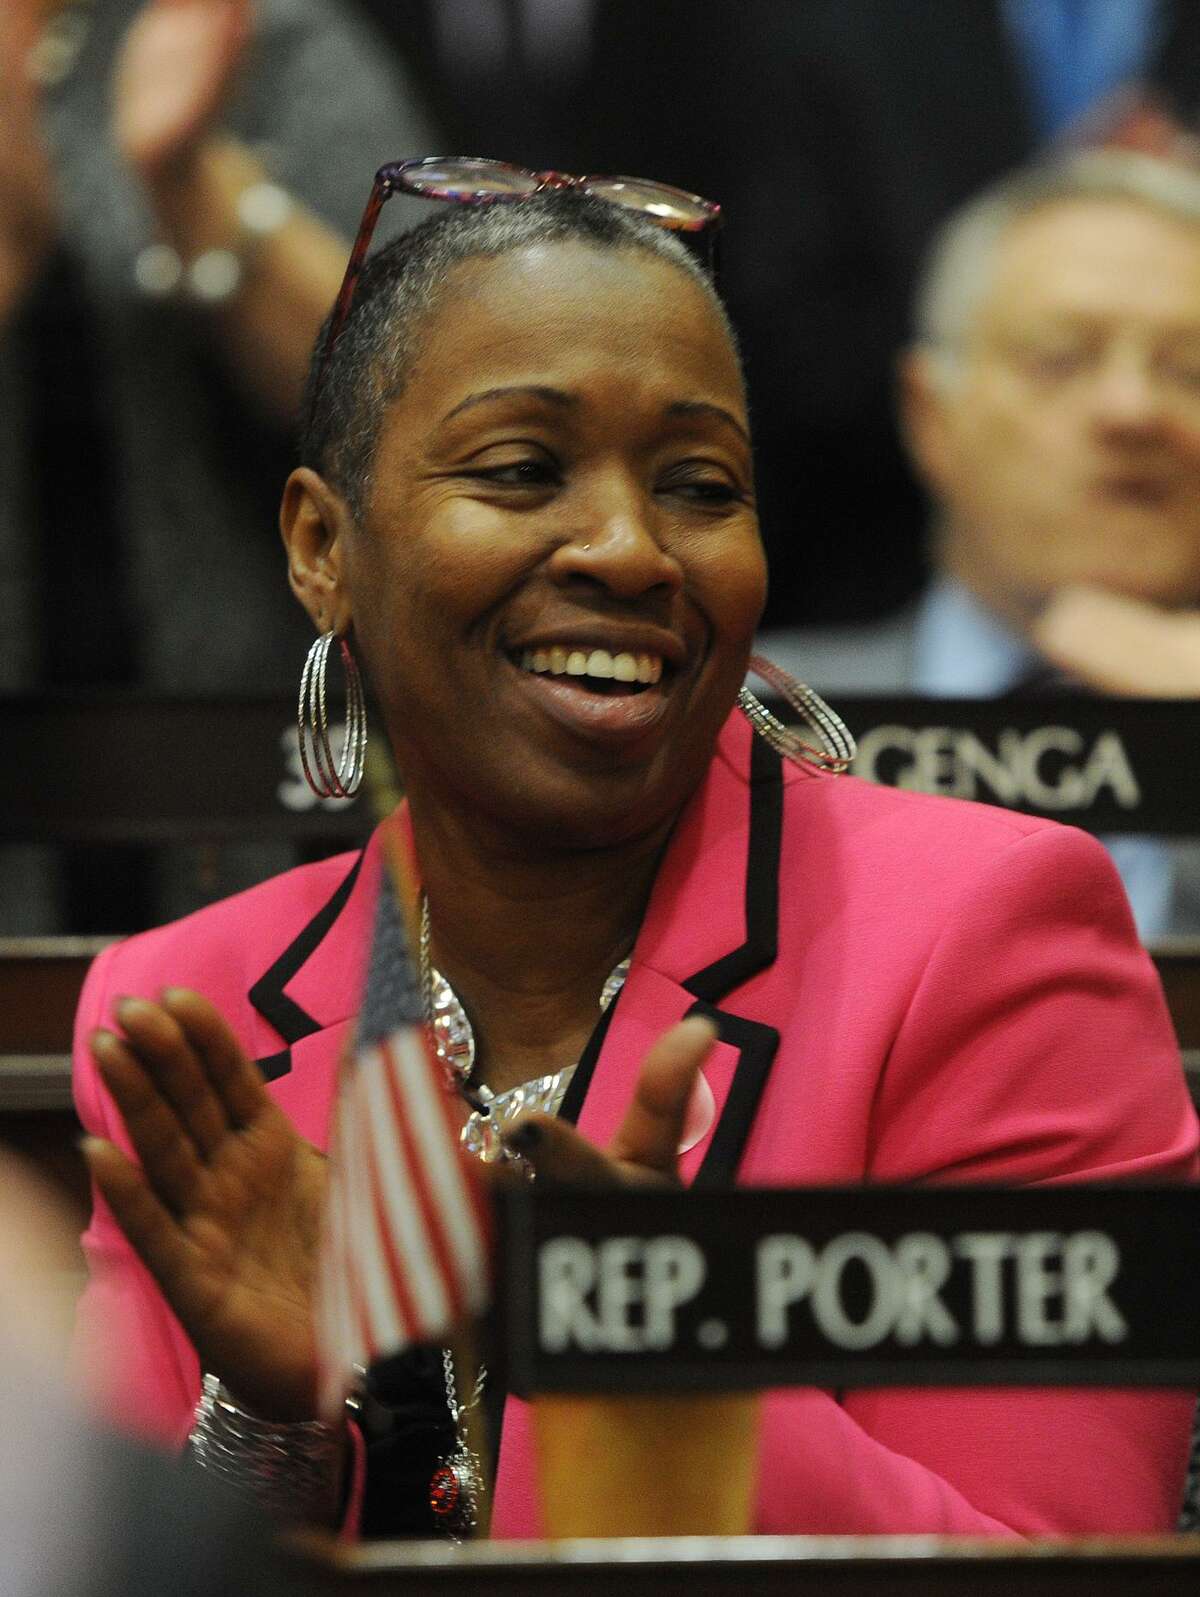 Rep. Robyn Porter, D-New Haven, applauds during the opening session of the state legislature at the Capitol in Hartford, Conn. on Wednesday, February 7, 2018. Chair of the Labor Committee, she championed a pay equity bill through the House on Wednesday, April 11, 2018.